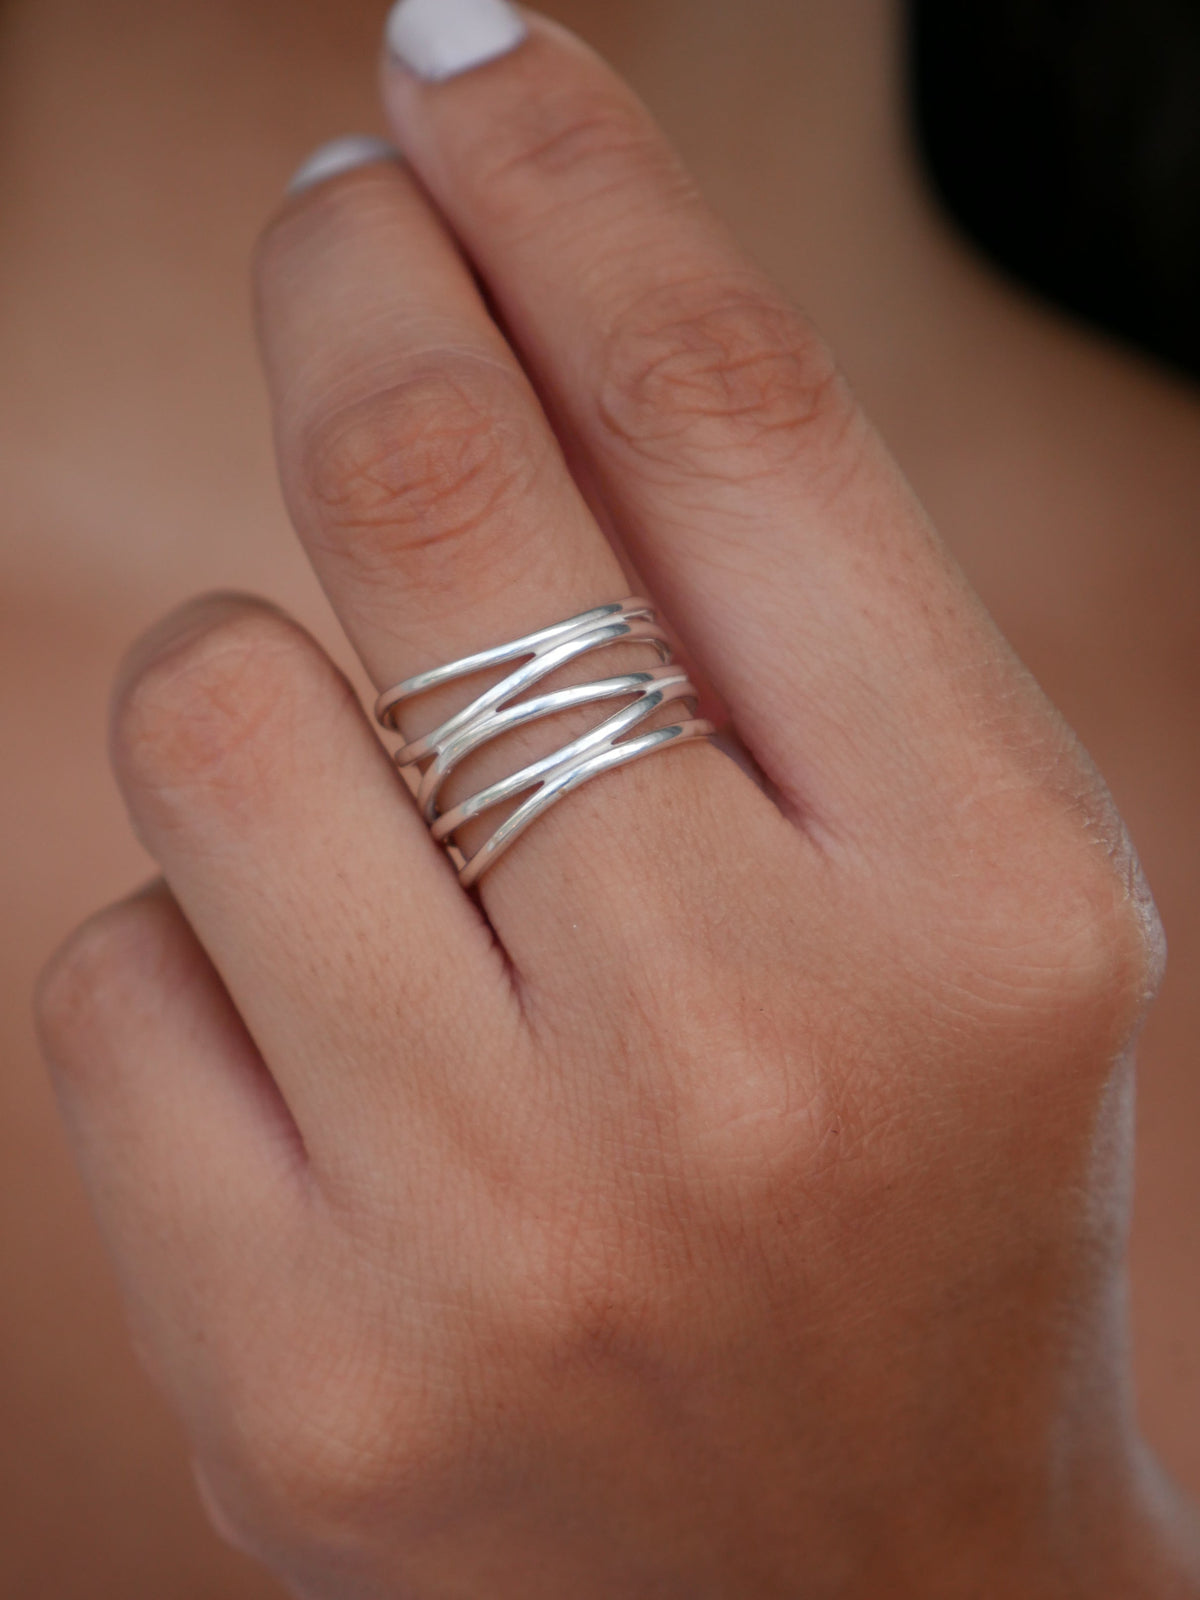 rings, ring, jewelry, sterling silver rings, .925, accessories, fashion jewelry, stacked rings, plain rings, rings that wont turn green, cool jewelry, trending on instagram and tiktok, jewelry store, plain rings, statement rings, nice rings, gift ideas, graduation gift ideas, birthday gift ideas, fine jewelry, affordable, chunky rings, rings for everyday wear, casual jewelry, popular accessories, statement rings 